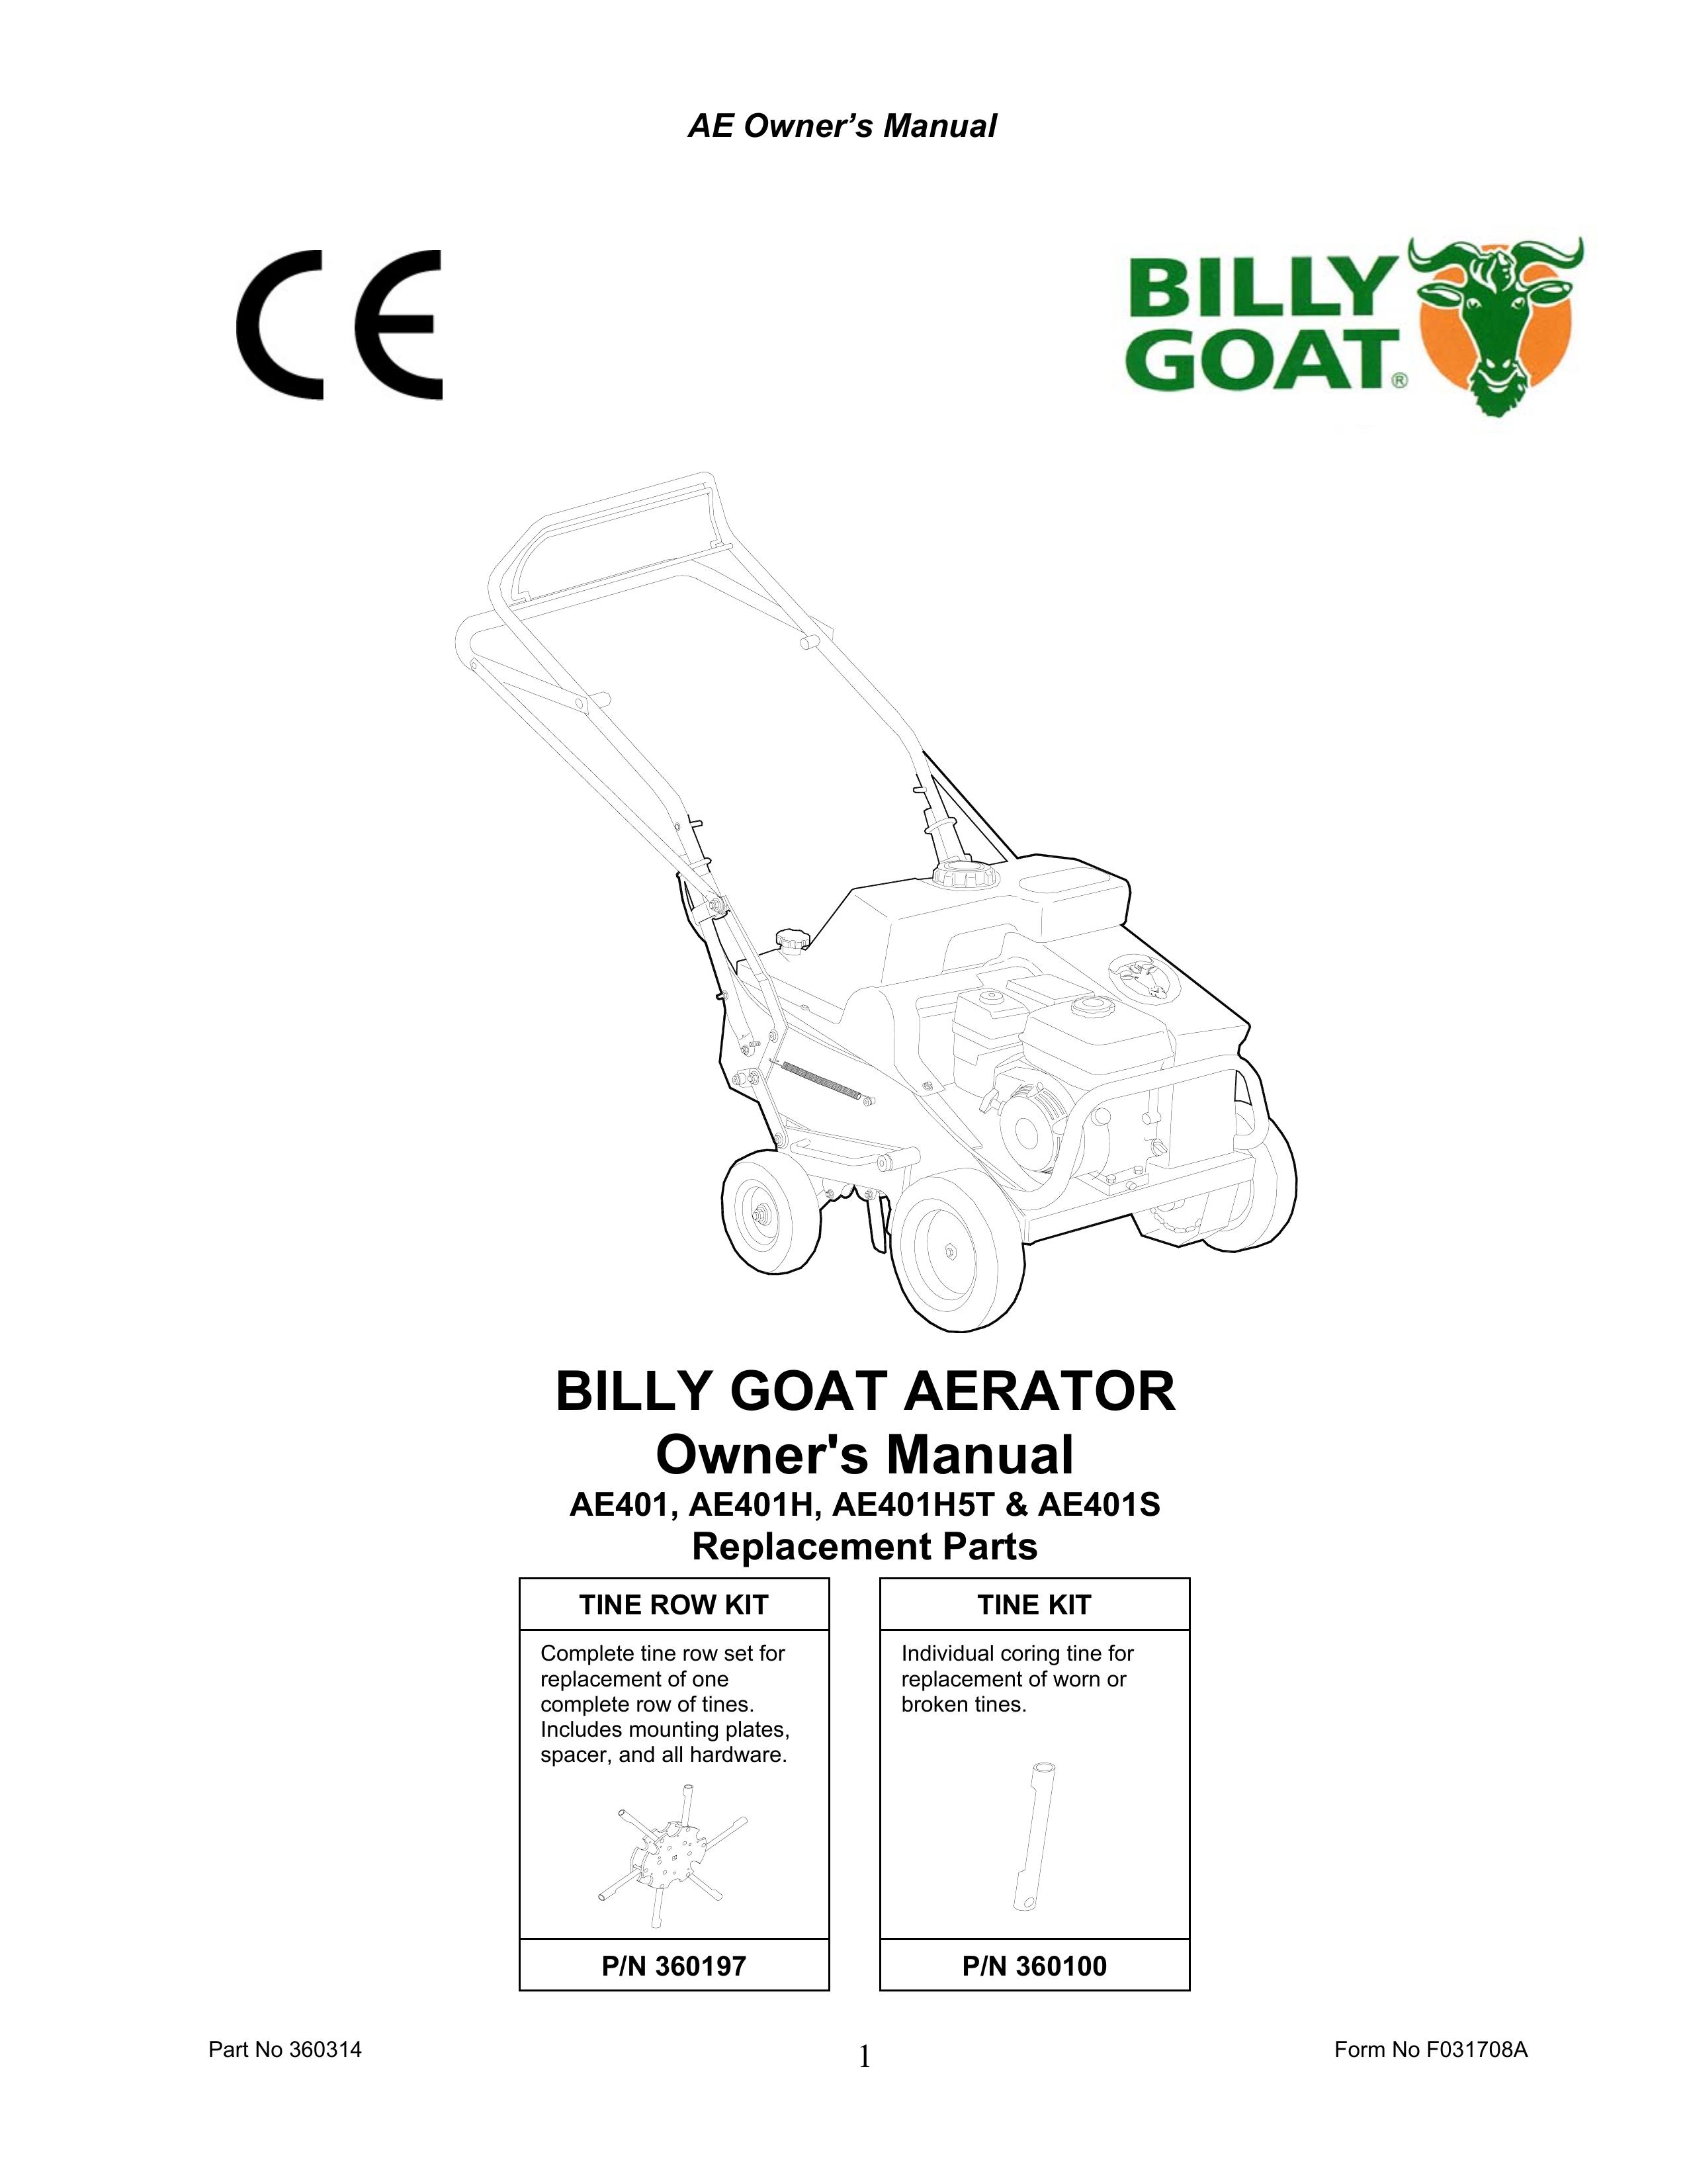 Billy Goat AE401S Lawn Aerator User Manual